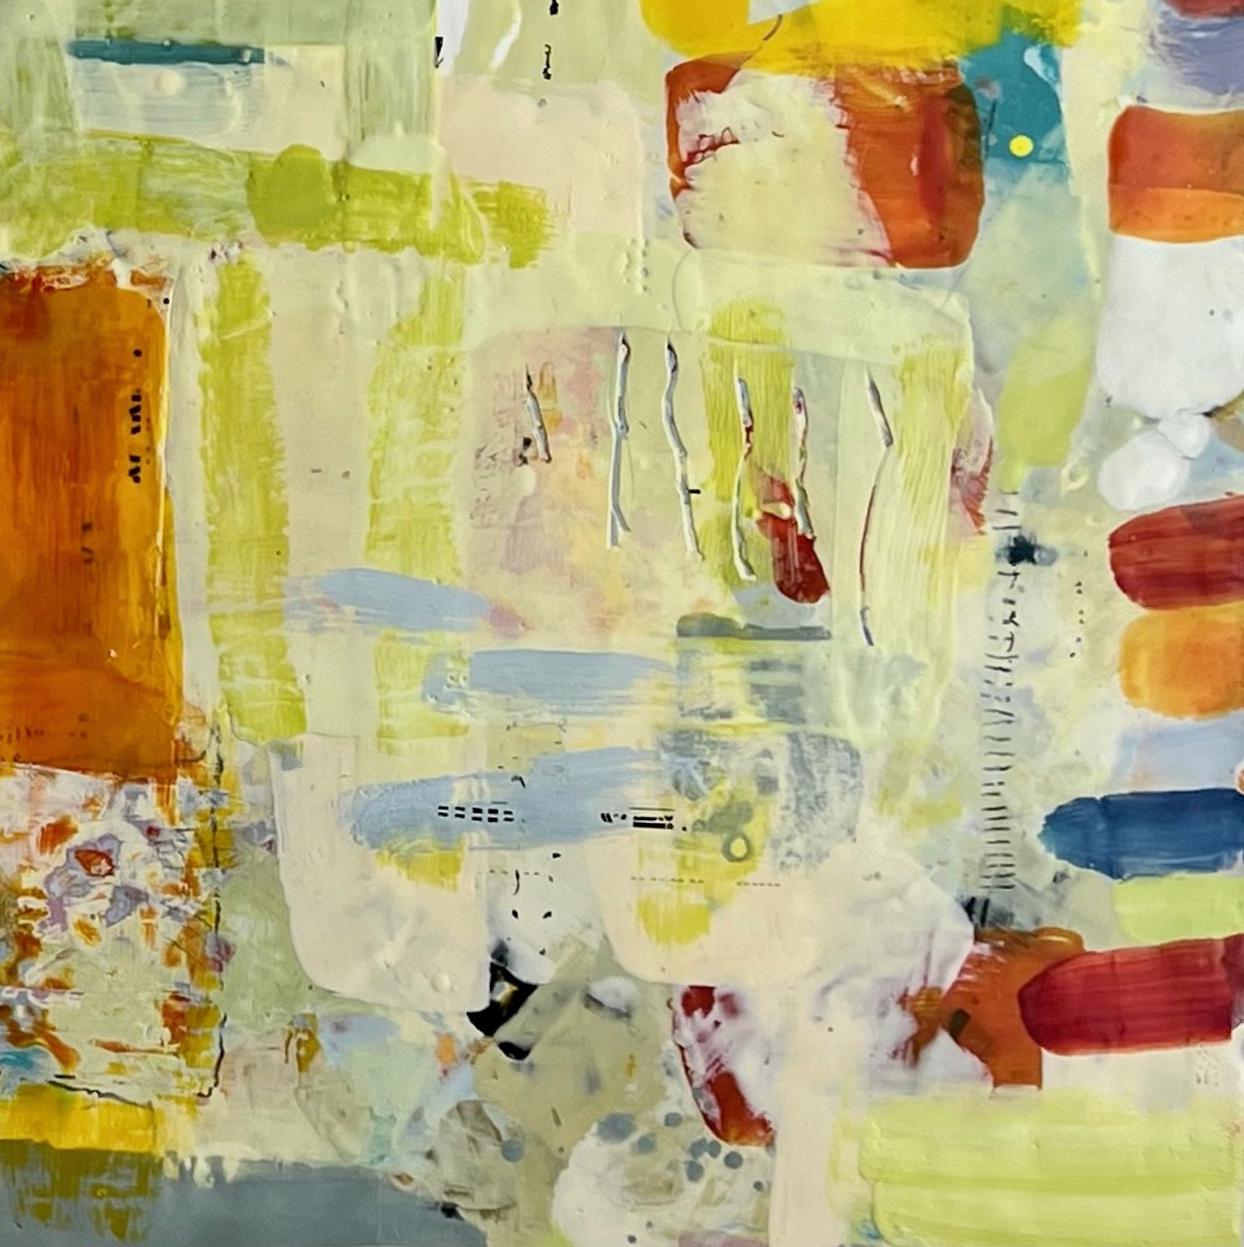 Spring, bright mulitcolored abstract encaustic painting on board - Painting by Lisa Pressman